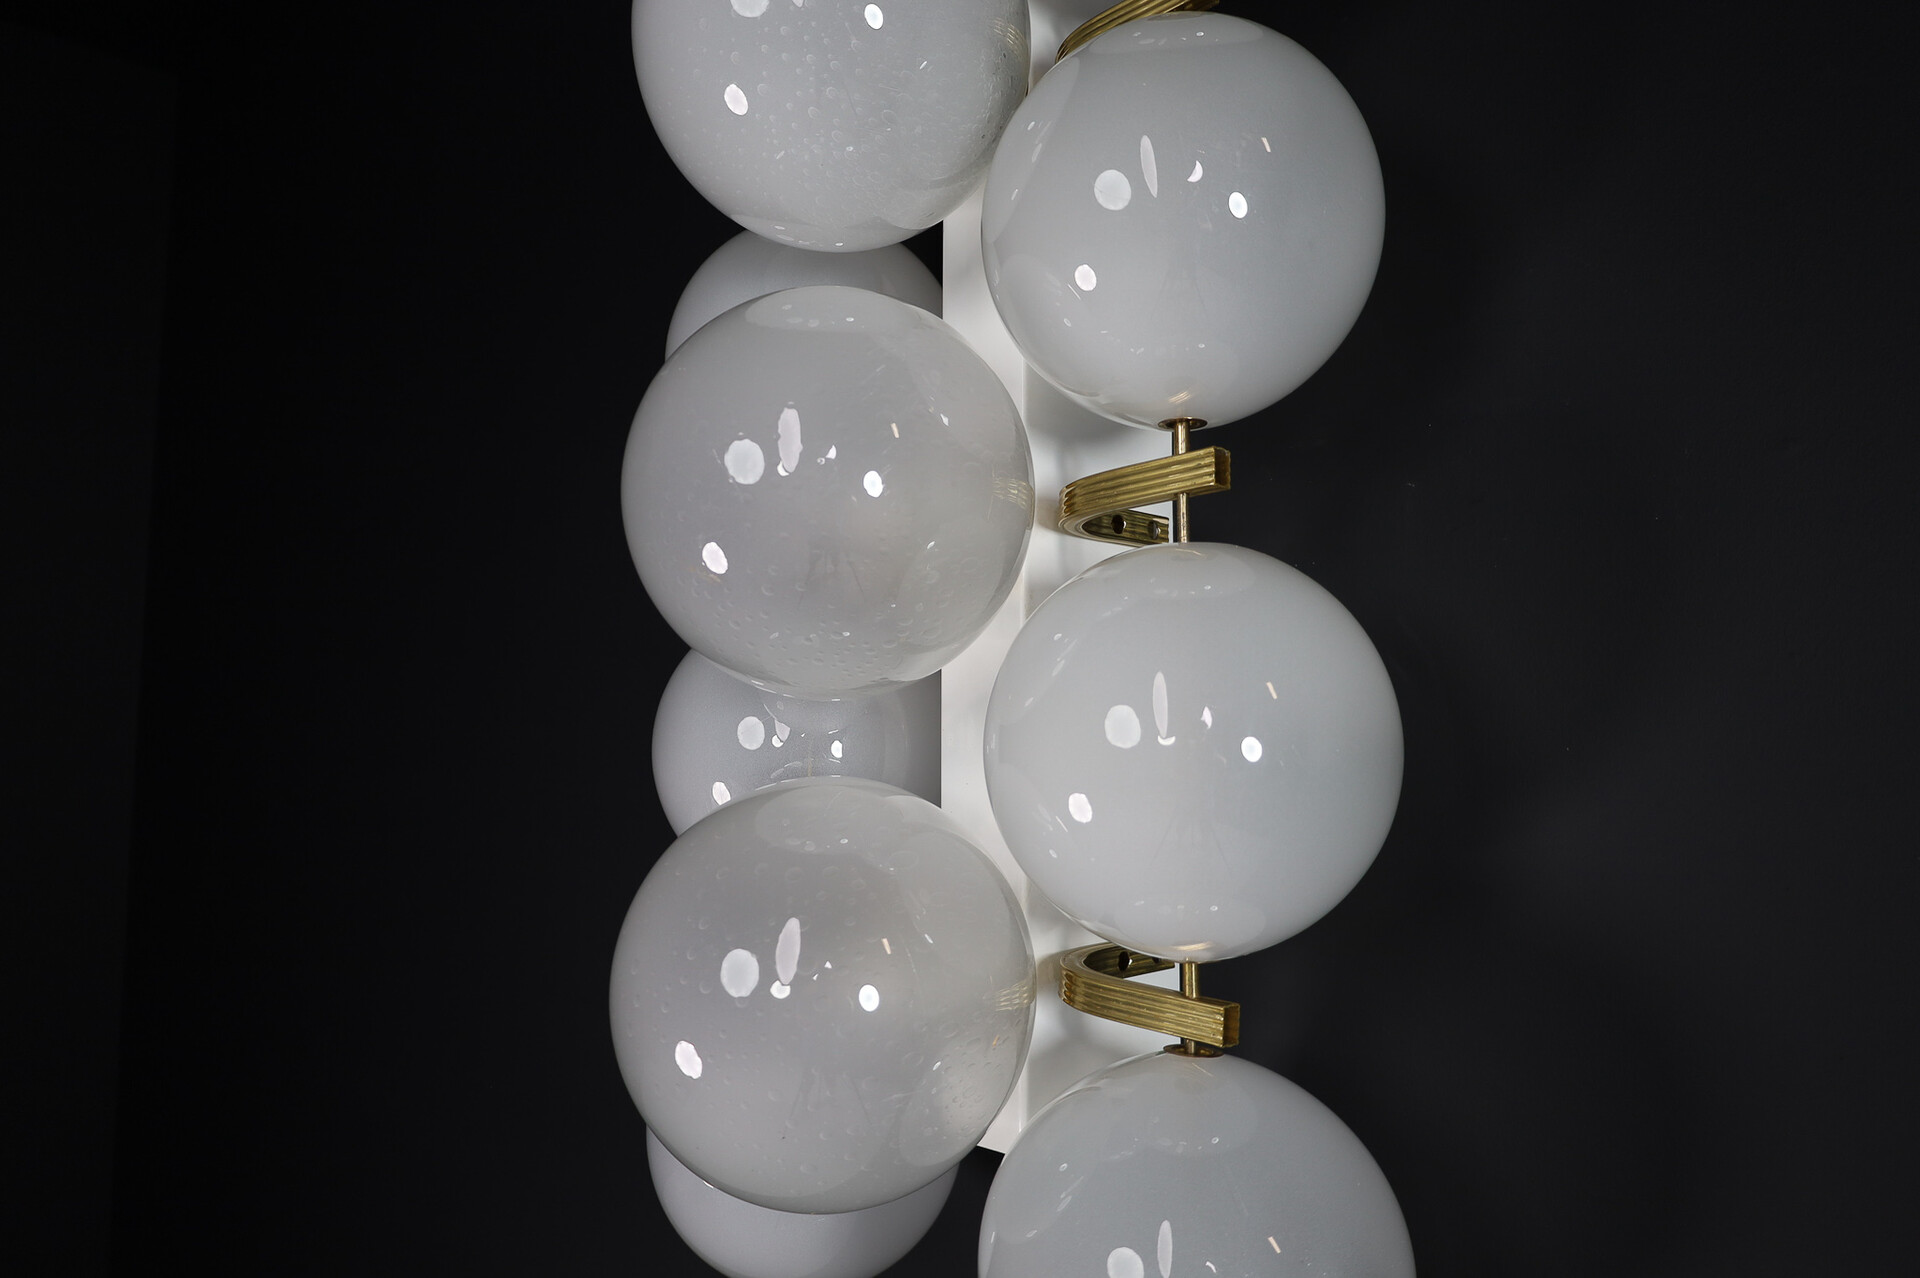 Mid century modern Large Brass Bohemian Wall Chandeliers With frosted glass Globes 1960s Mid-20th century